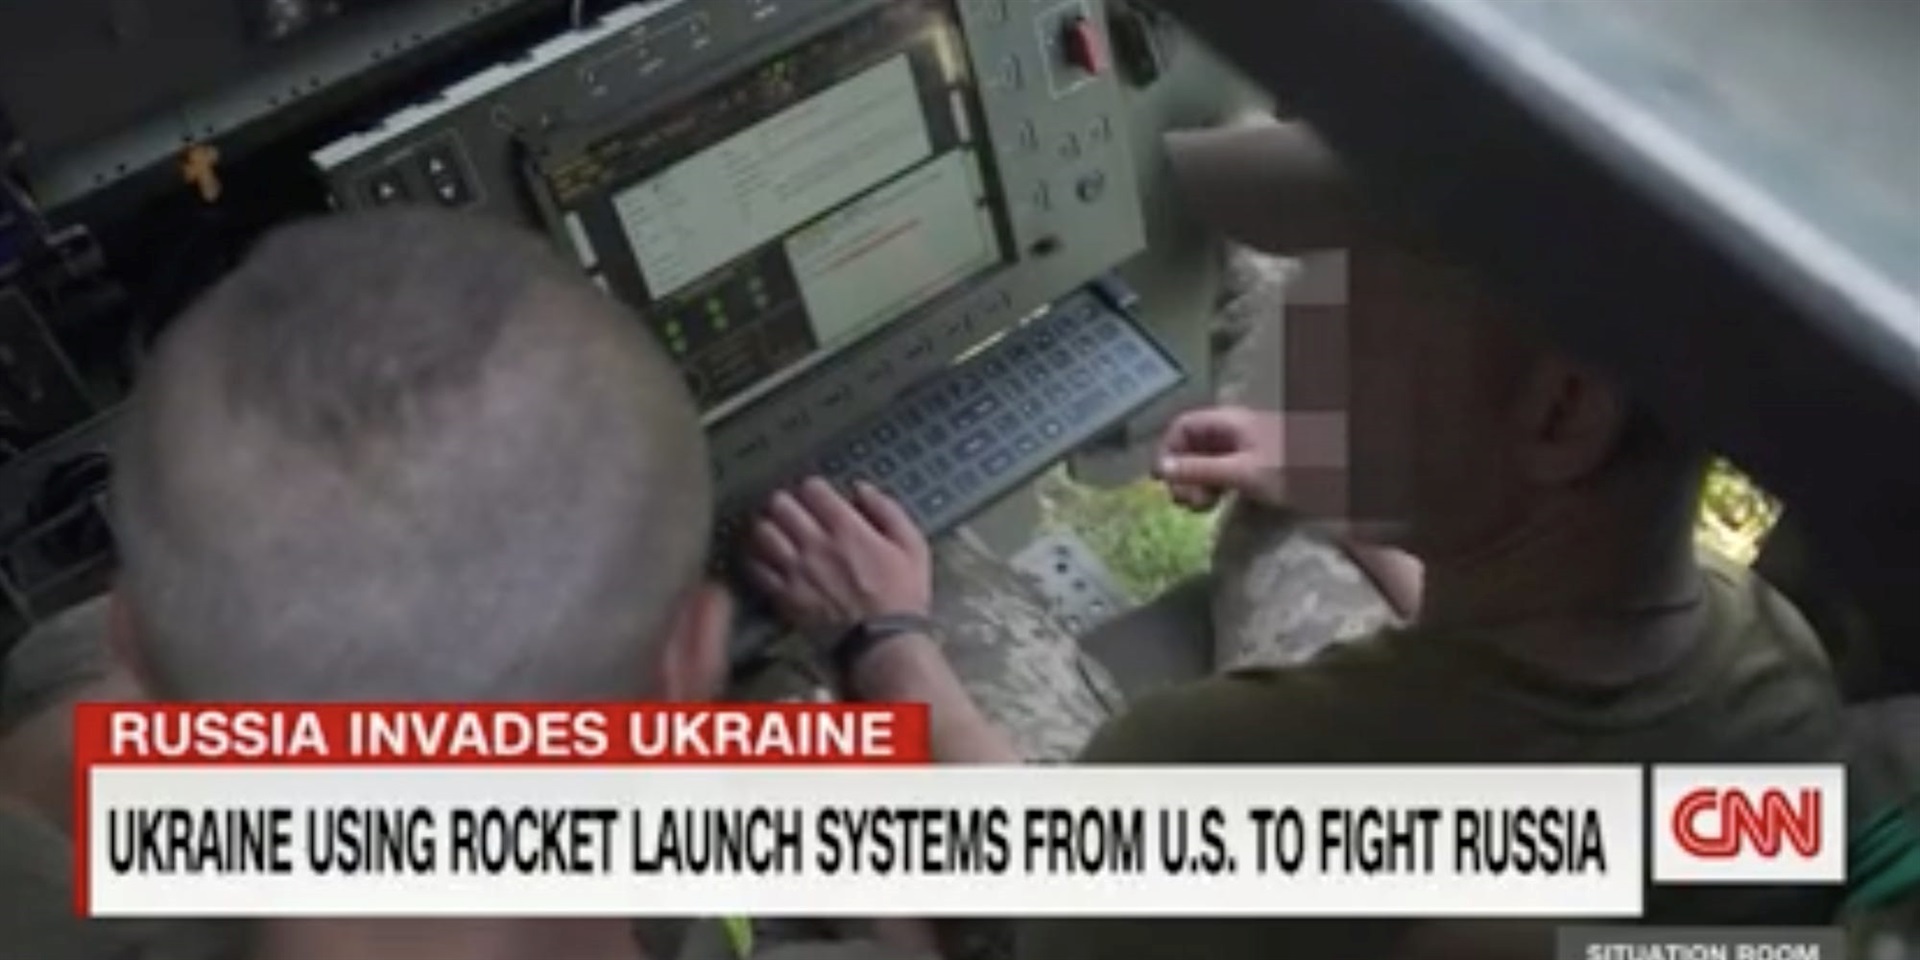 Two Ukrainian soldiers inside a US-donated HIMARS truck. CNN